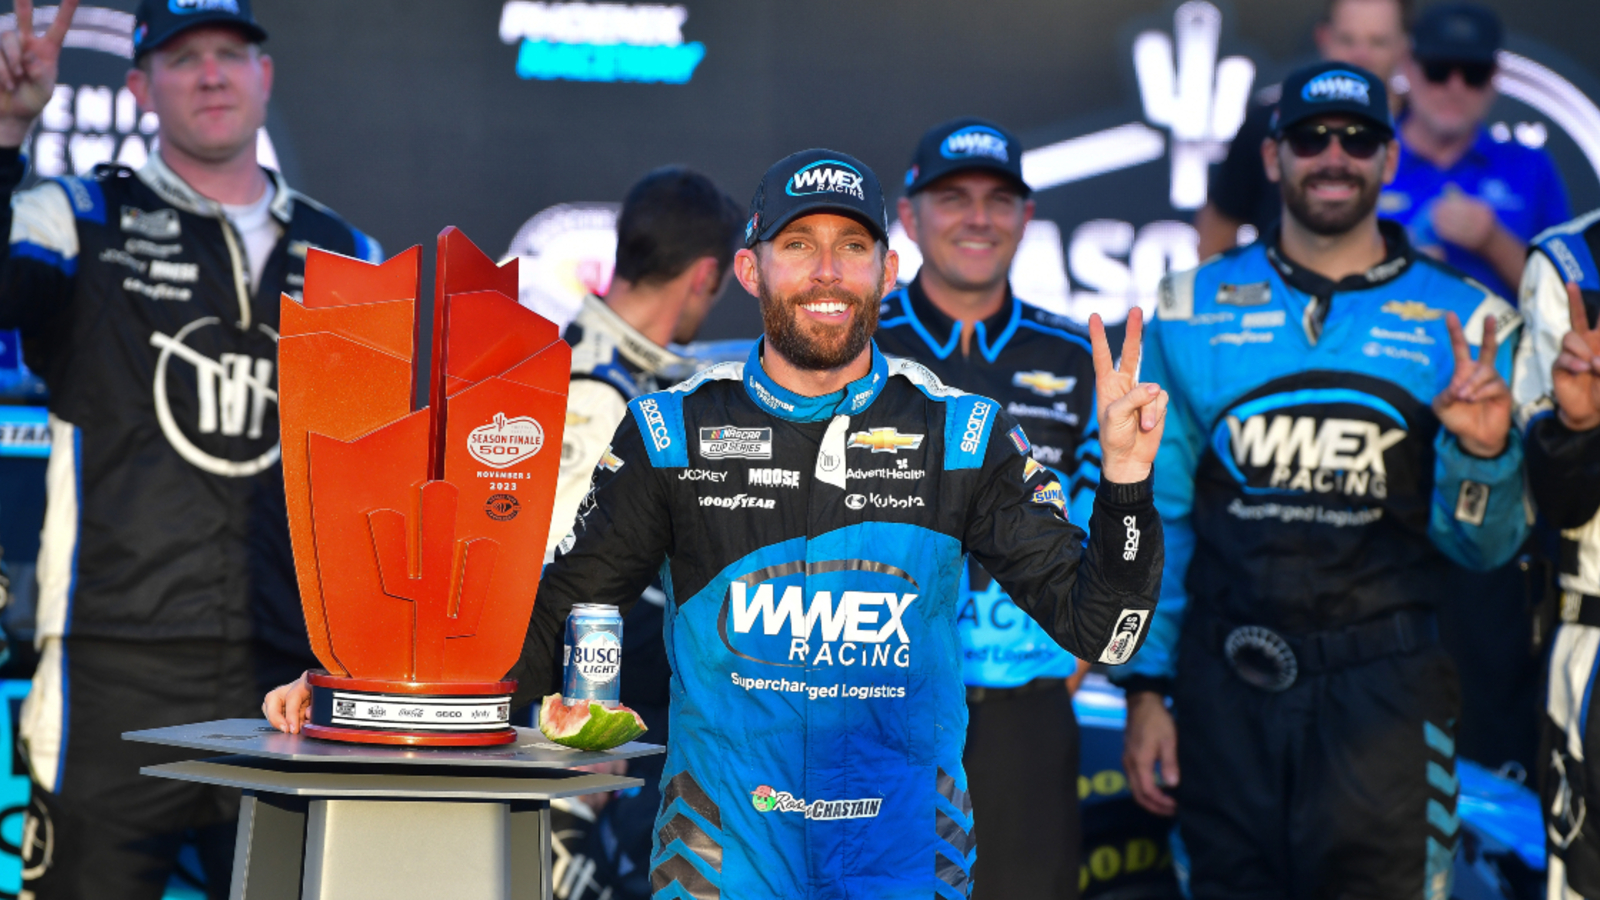 Ross Chastain believes he can win Cup Series championship as Trackhouse Racing expands